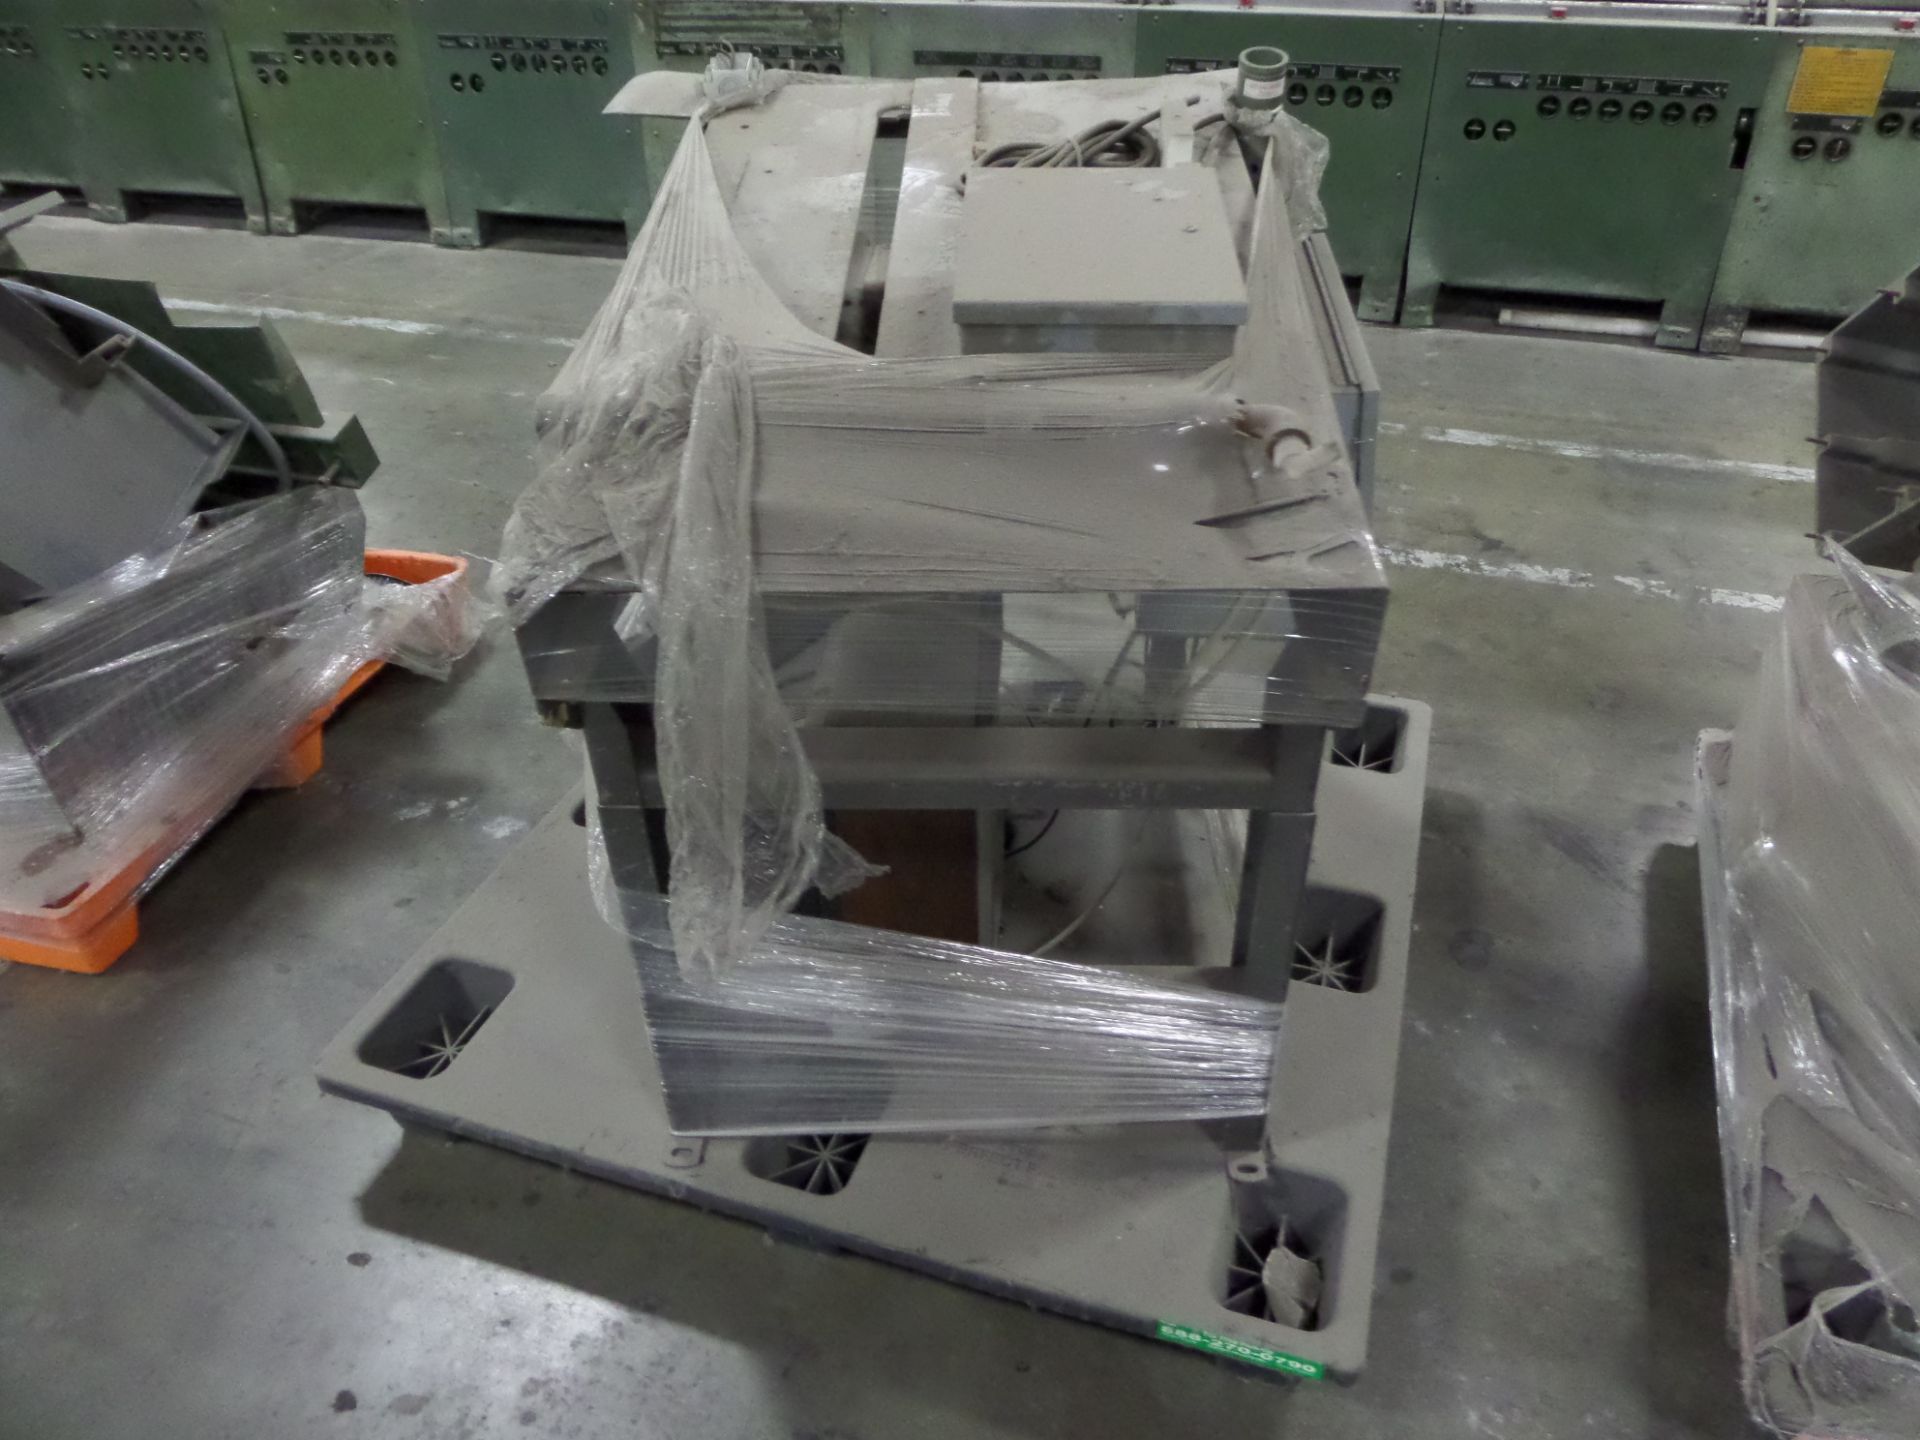 Pallets of Muller Inserter Parts and Conveyors with (2) Carts of Assorted Parts. Asset Location: - Image 3 of 7